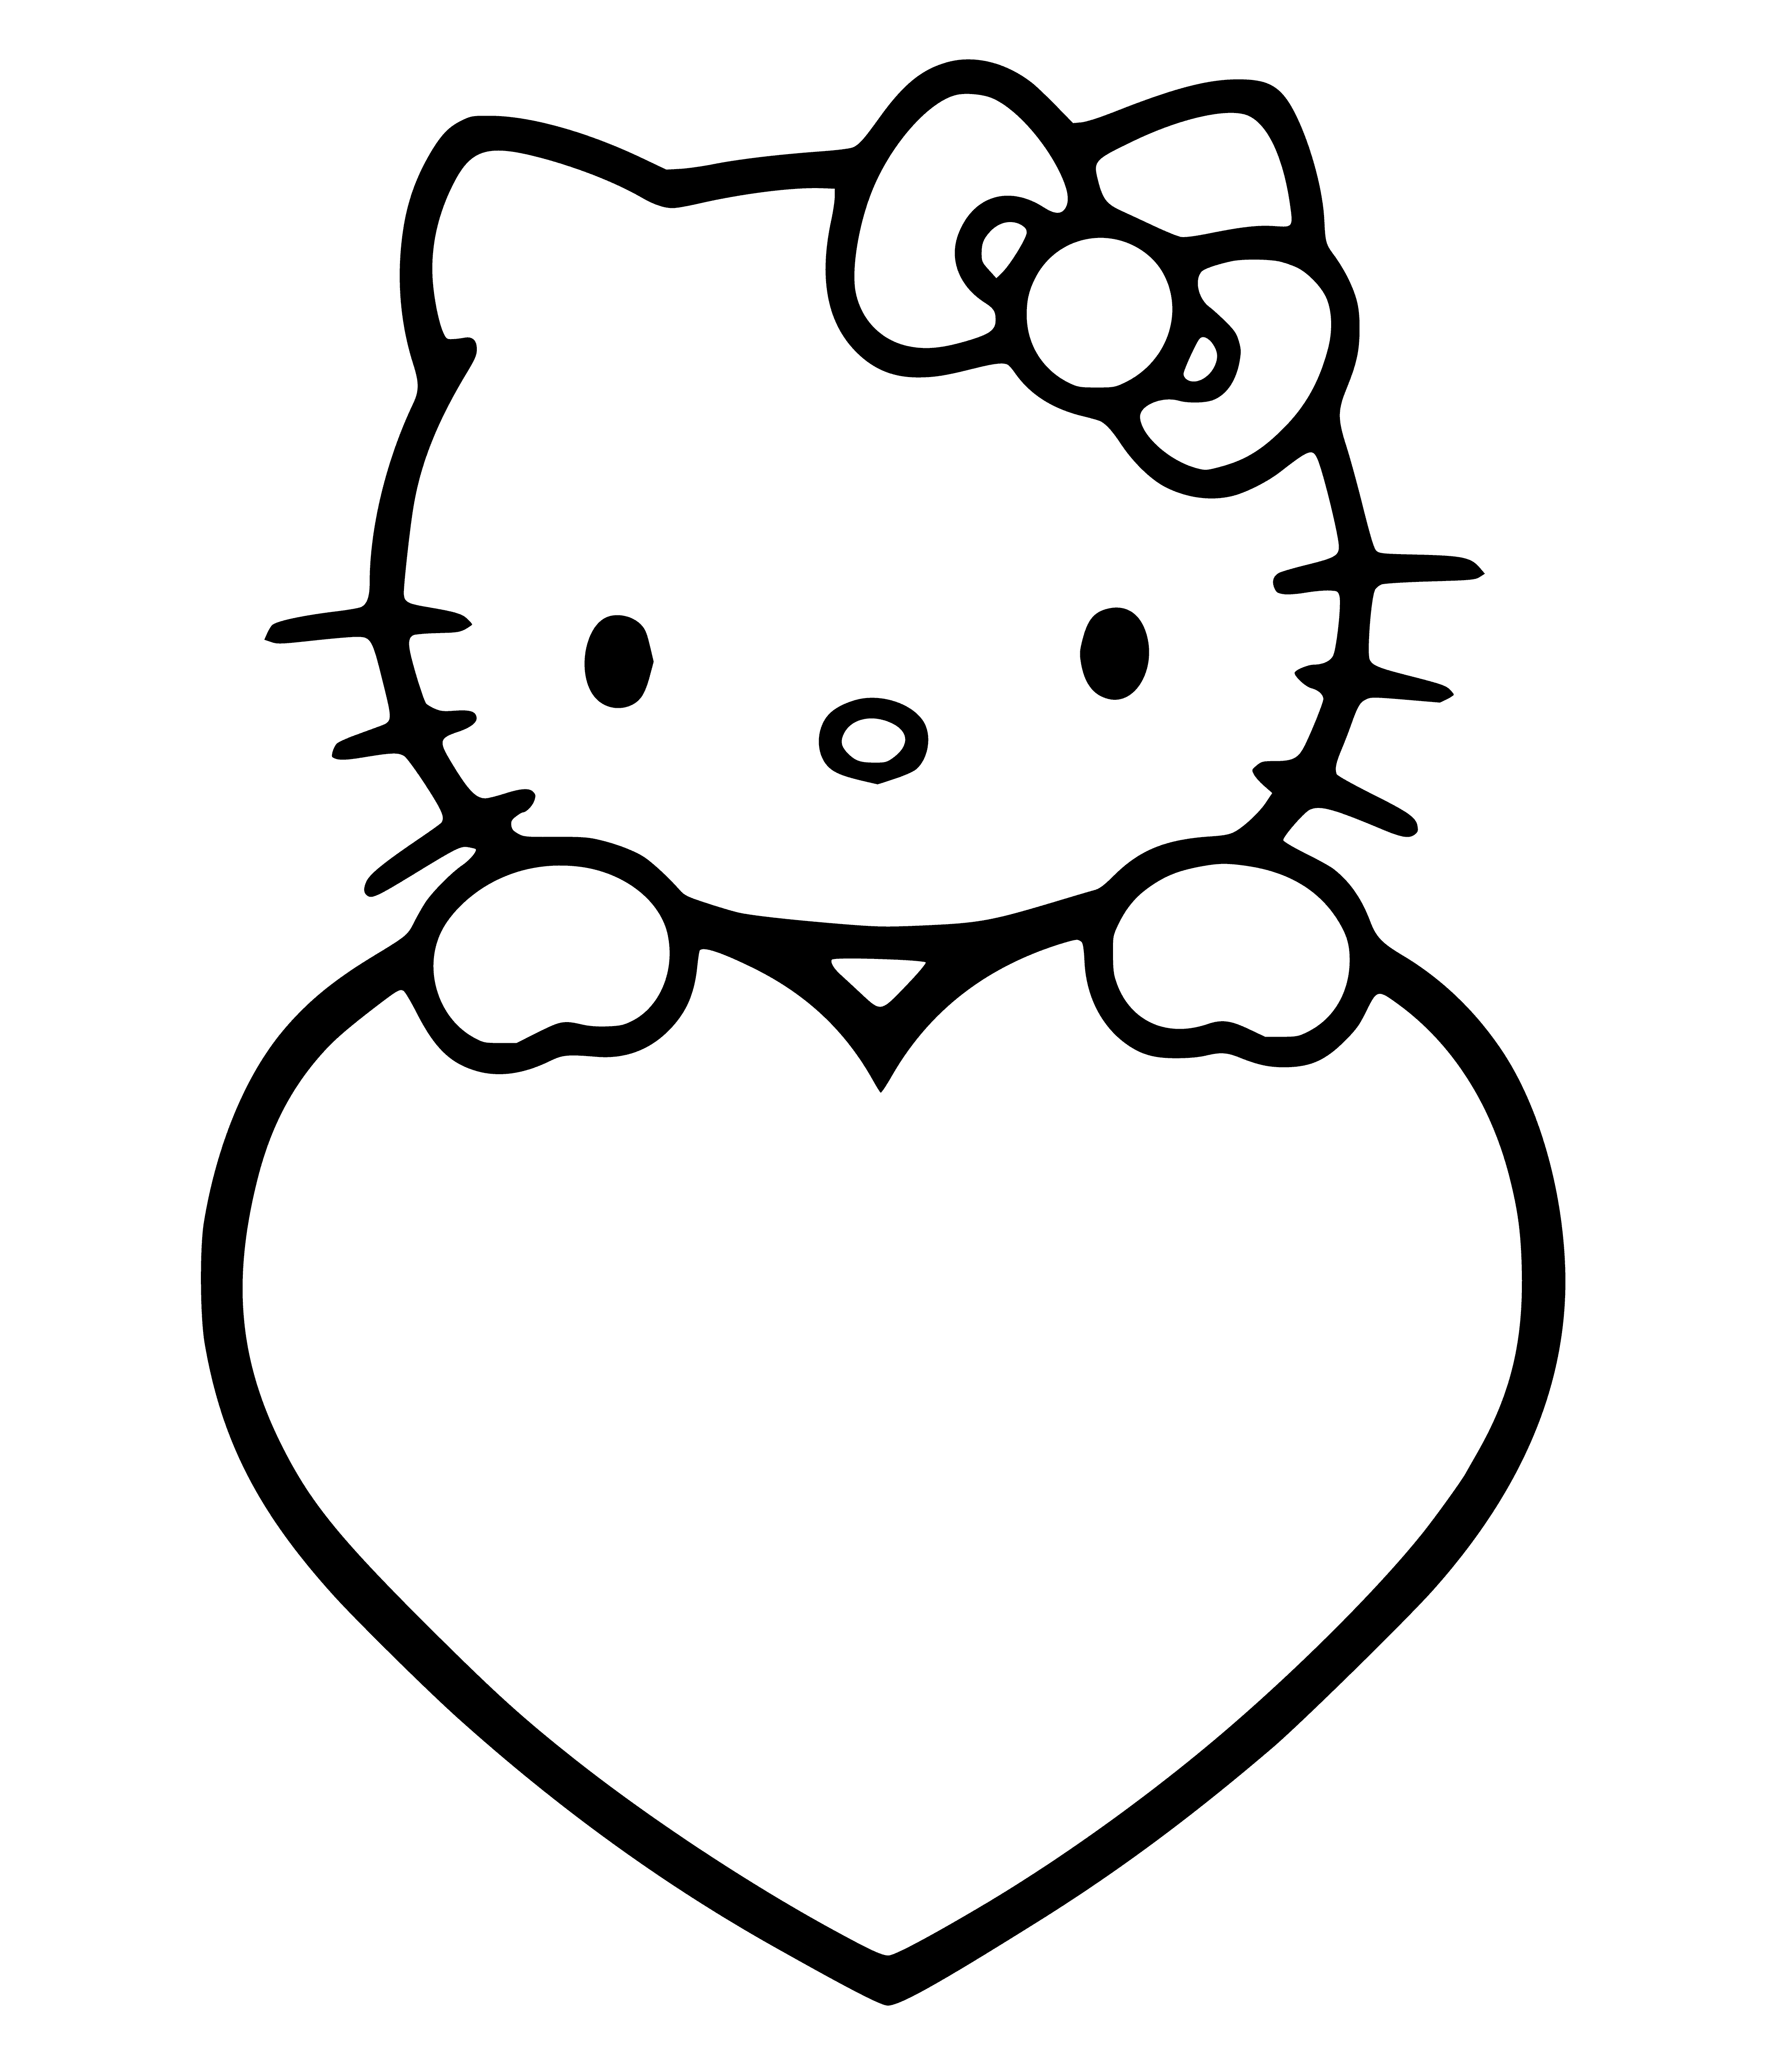 coloring page: Hello Kitty celebrates Valentine's Day with a red bow, heart-shaped lollipop, and sign that says 'Happy Valentine's Day'. #ValentinesDay